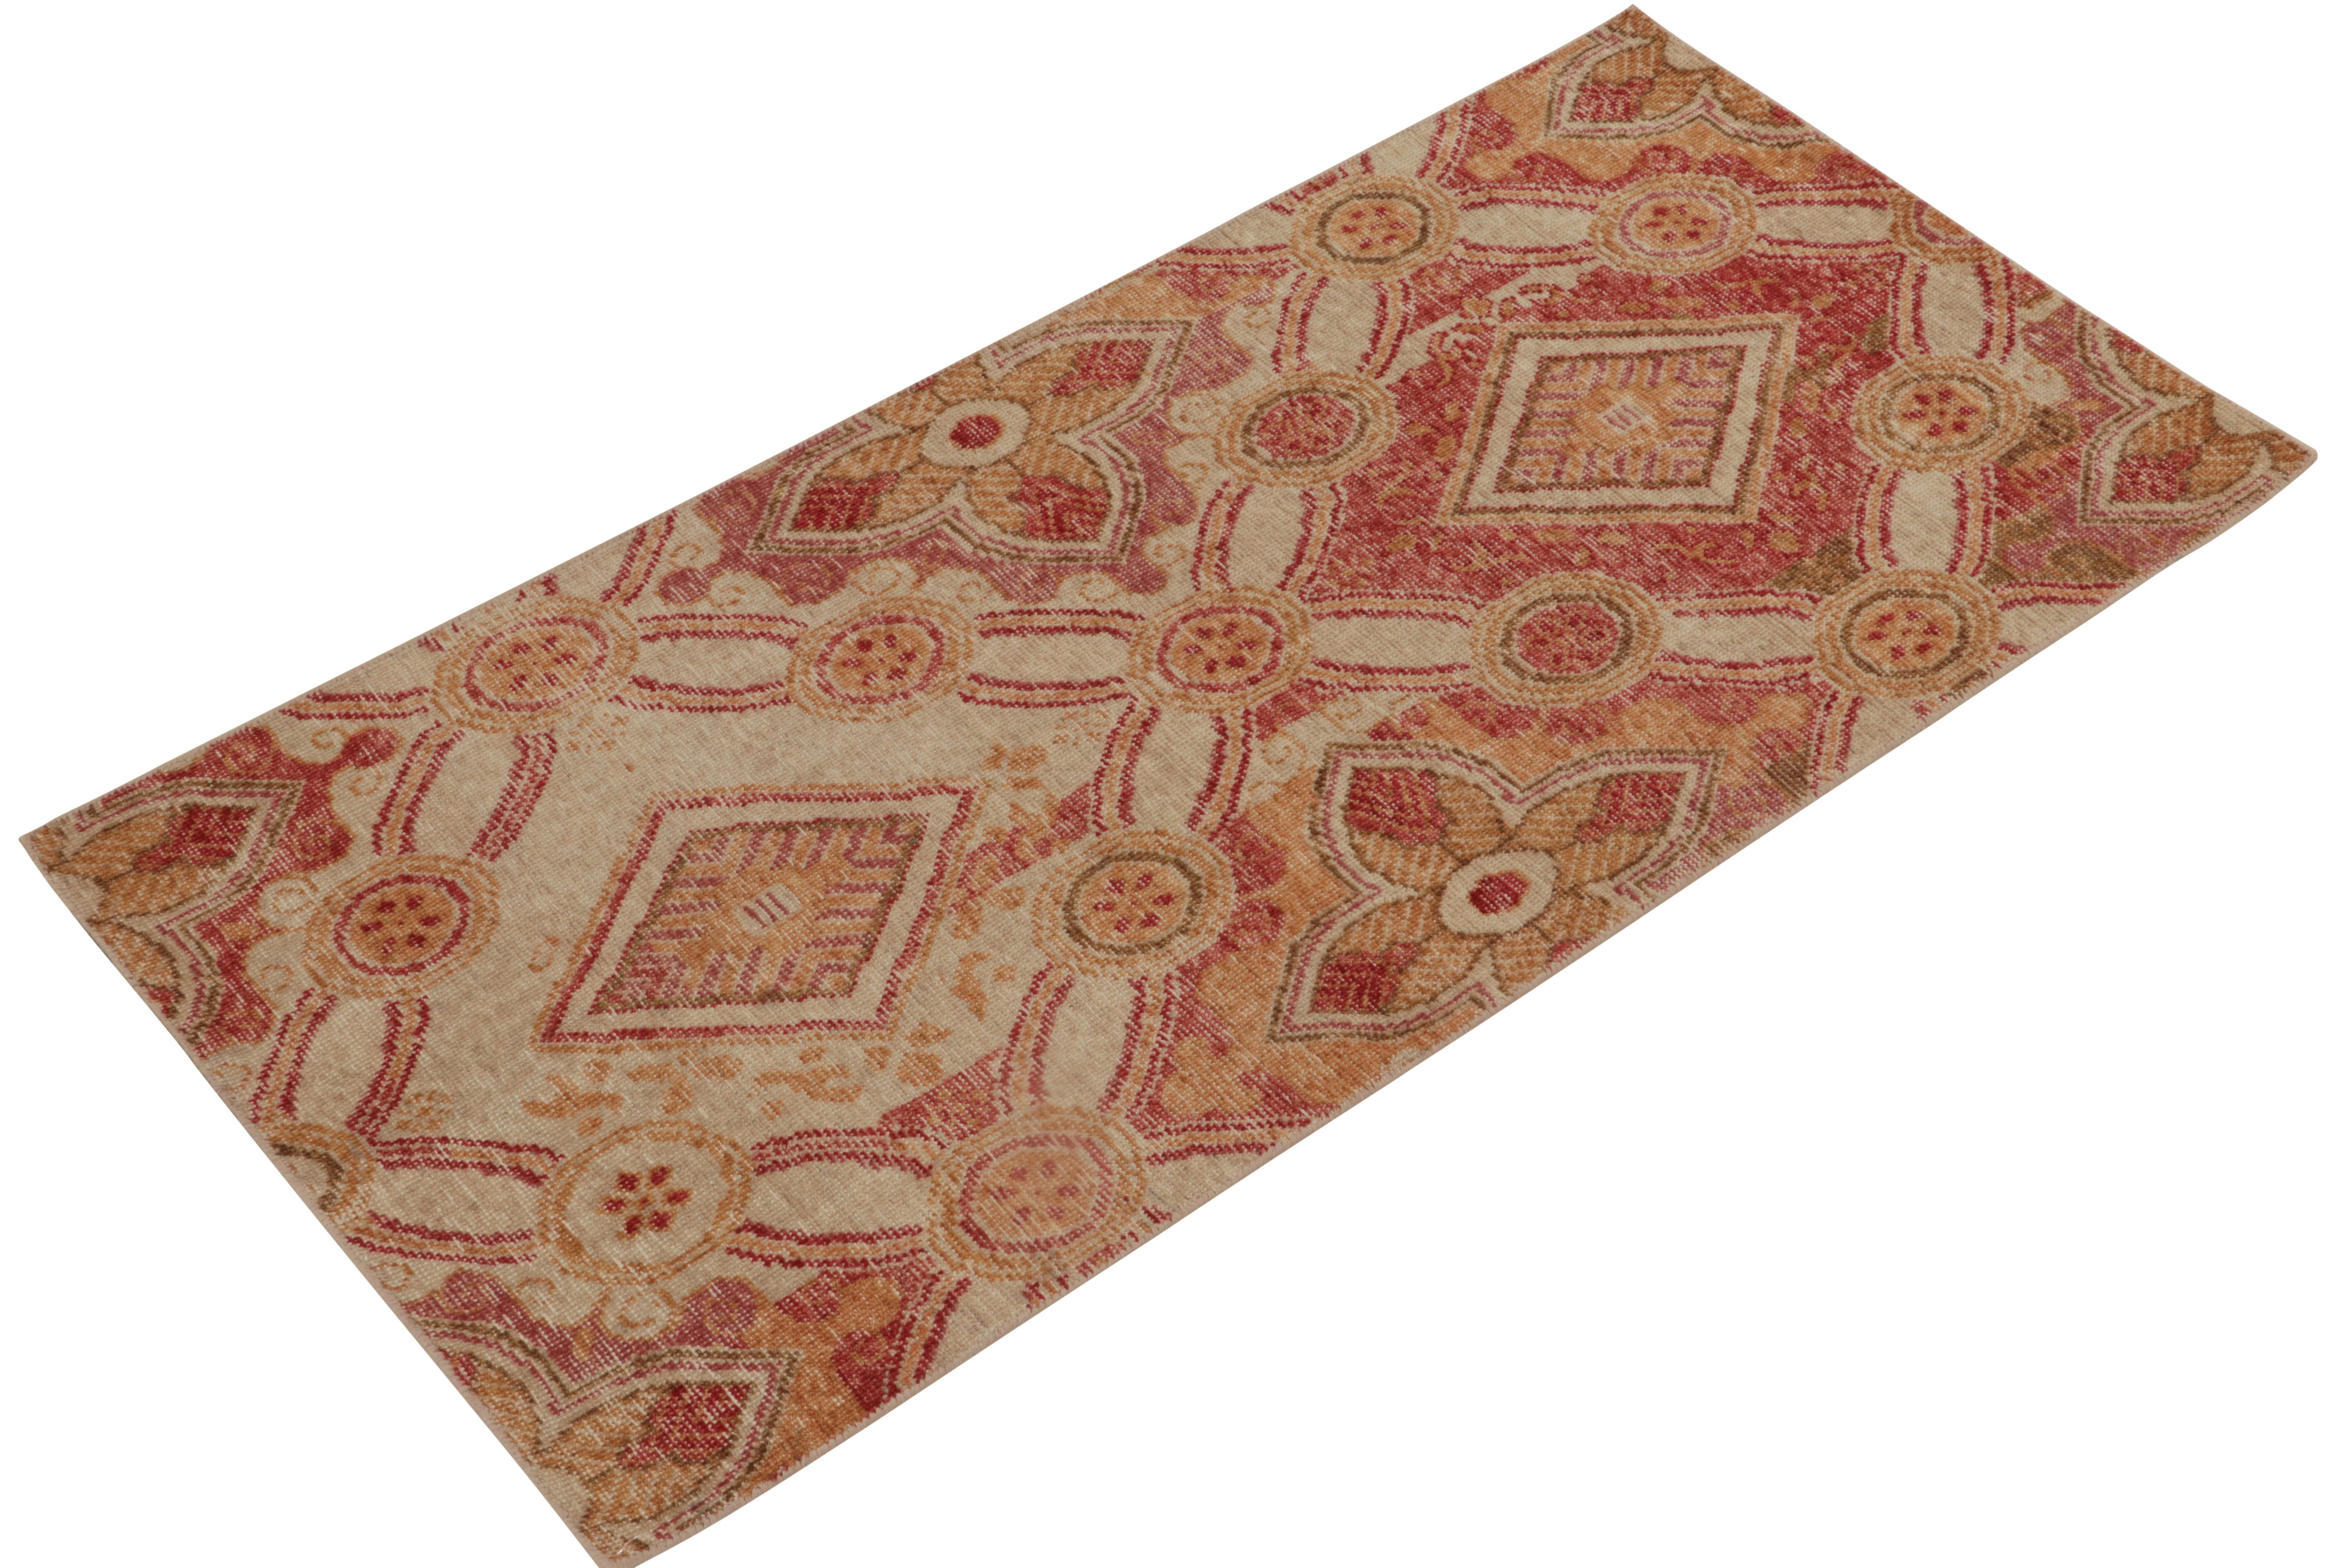 From Rug & Kilim’s Homage Collection, a 3x6 hand-knotted wool runner inspired by the most revered European sensibilities. 

On the Design: 

The vision flourishes with floral trellis patterns in red, gold, and beige-brown hues. This piece enjoys a